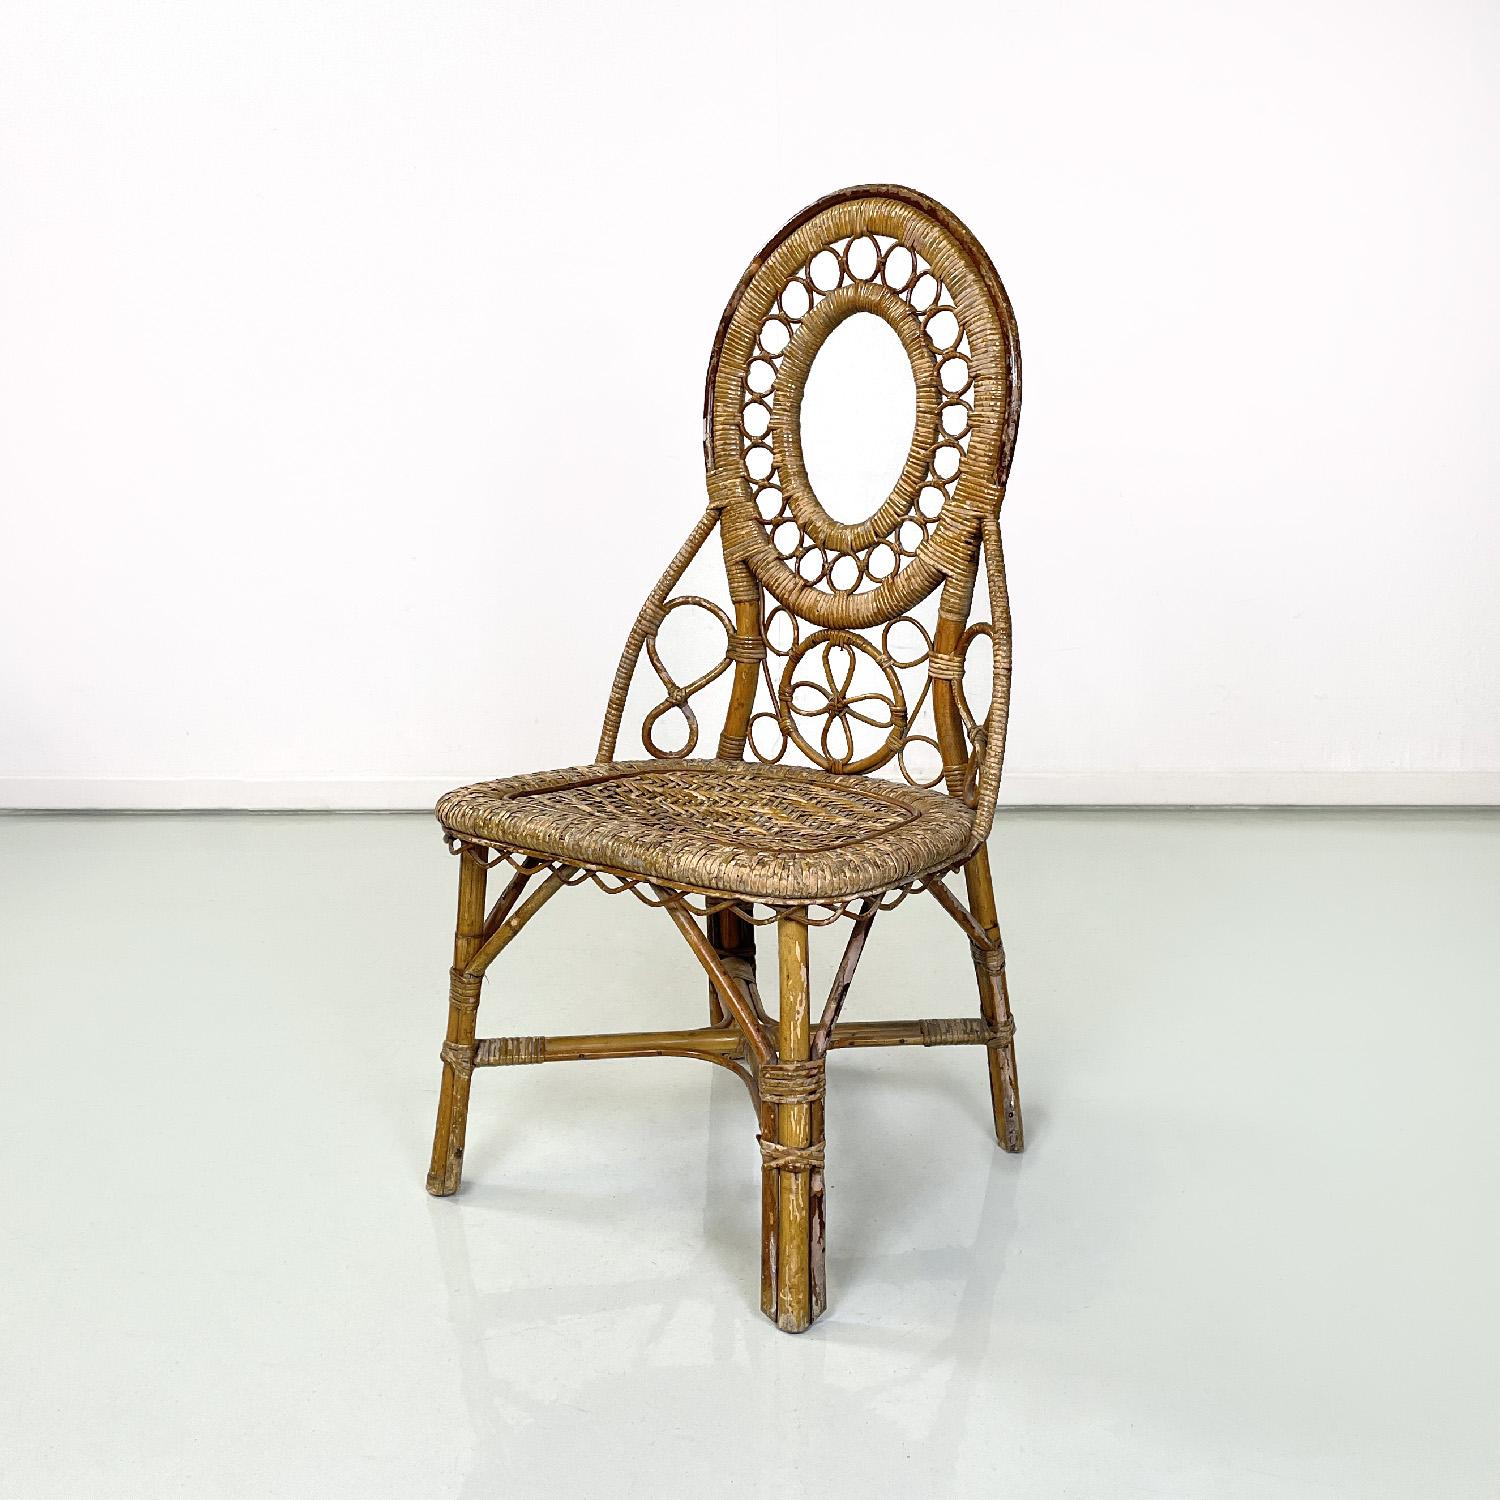 Early 20th Century Italian antique rattan chair with floral and geometric decoration, early 1900s For Sale